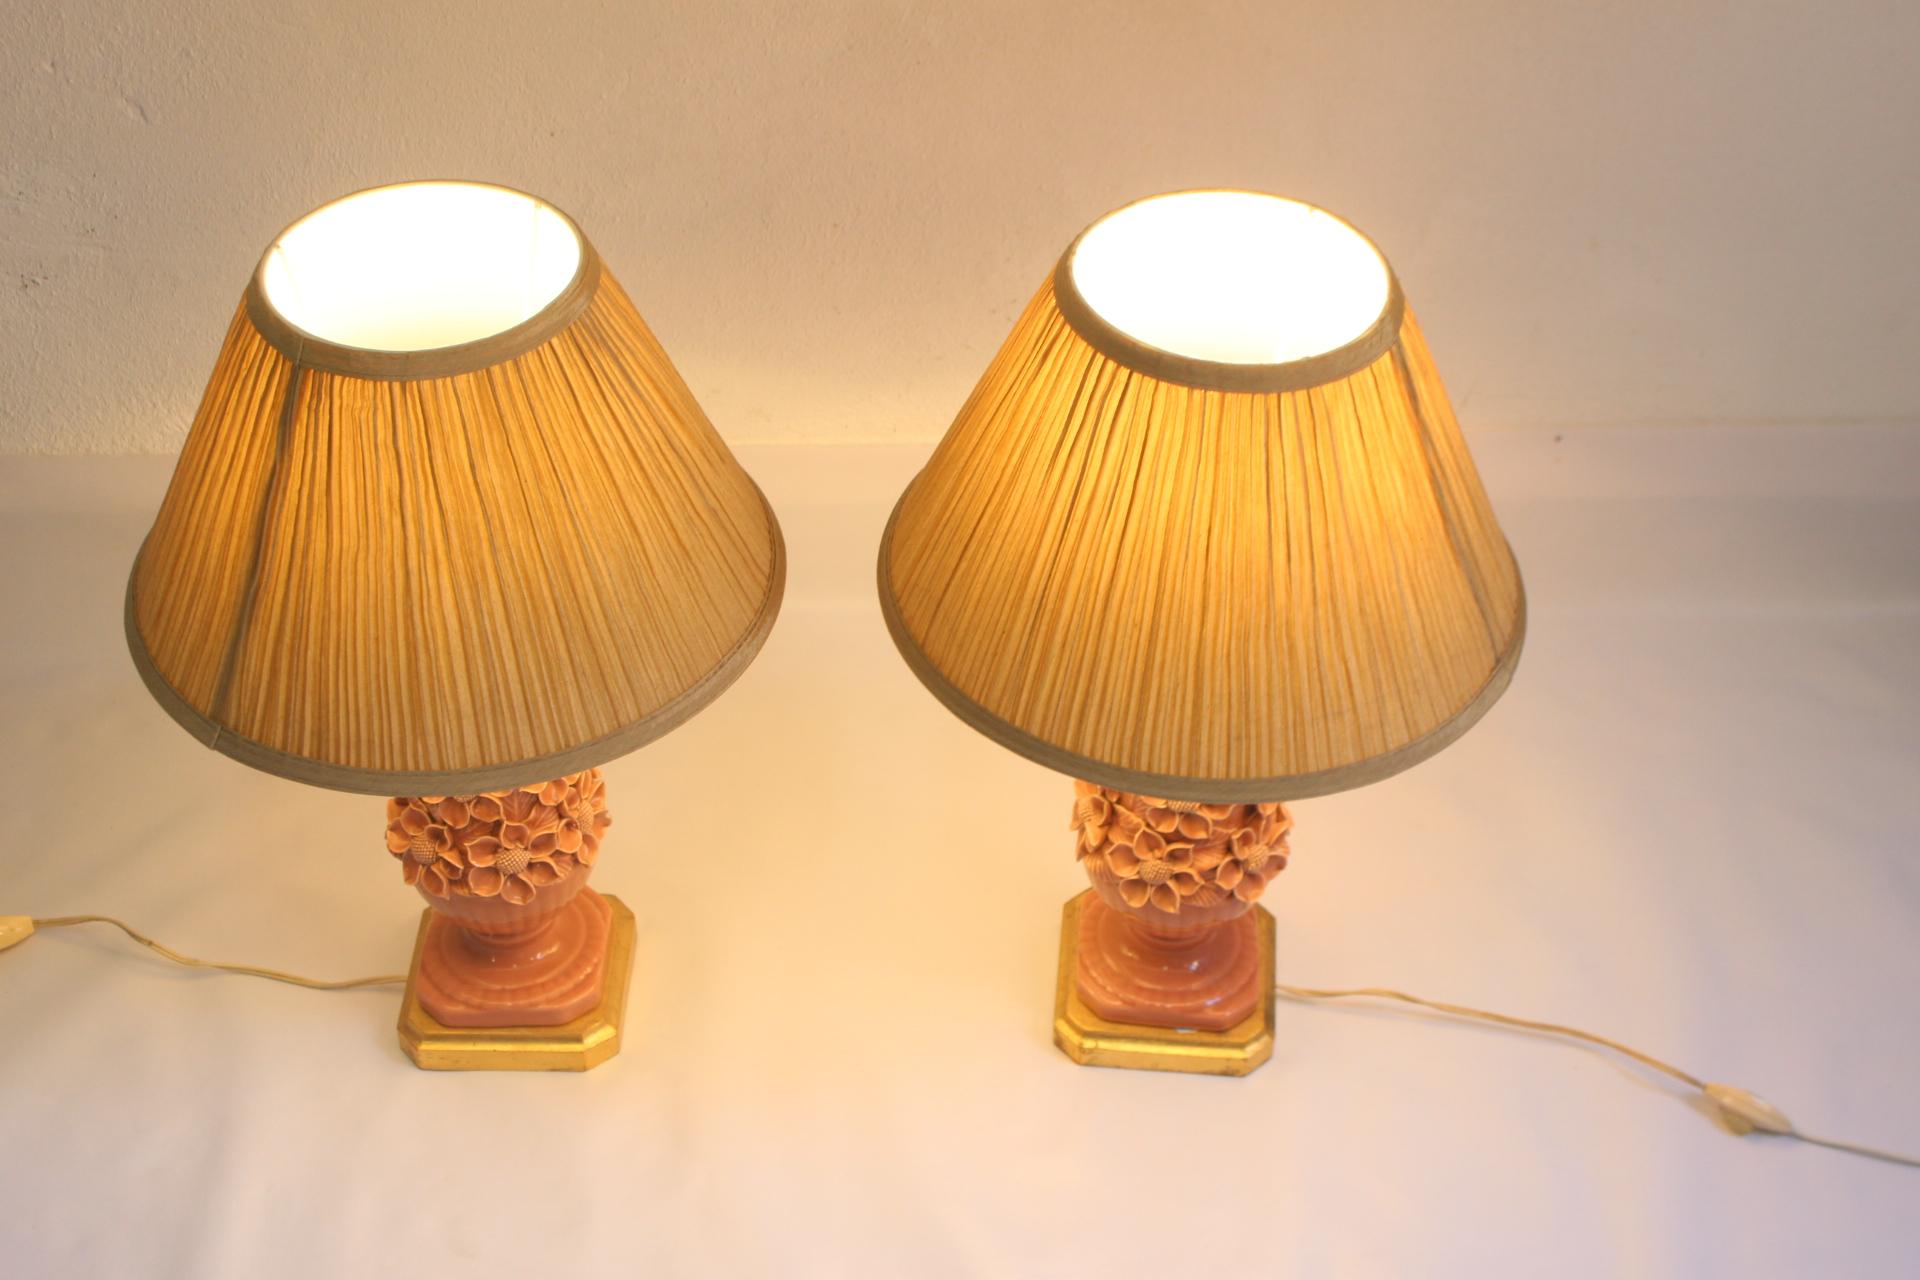 Set of 2 Ceramic Manises Flower Table Lamps in Salmon Color, 1950s For Sale 4